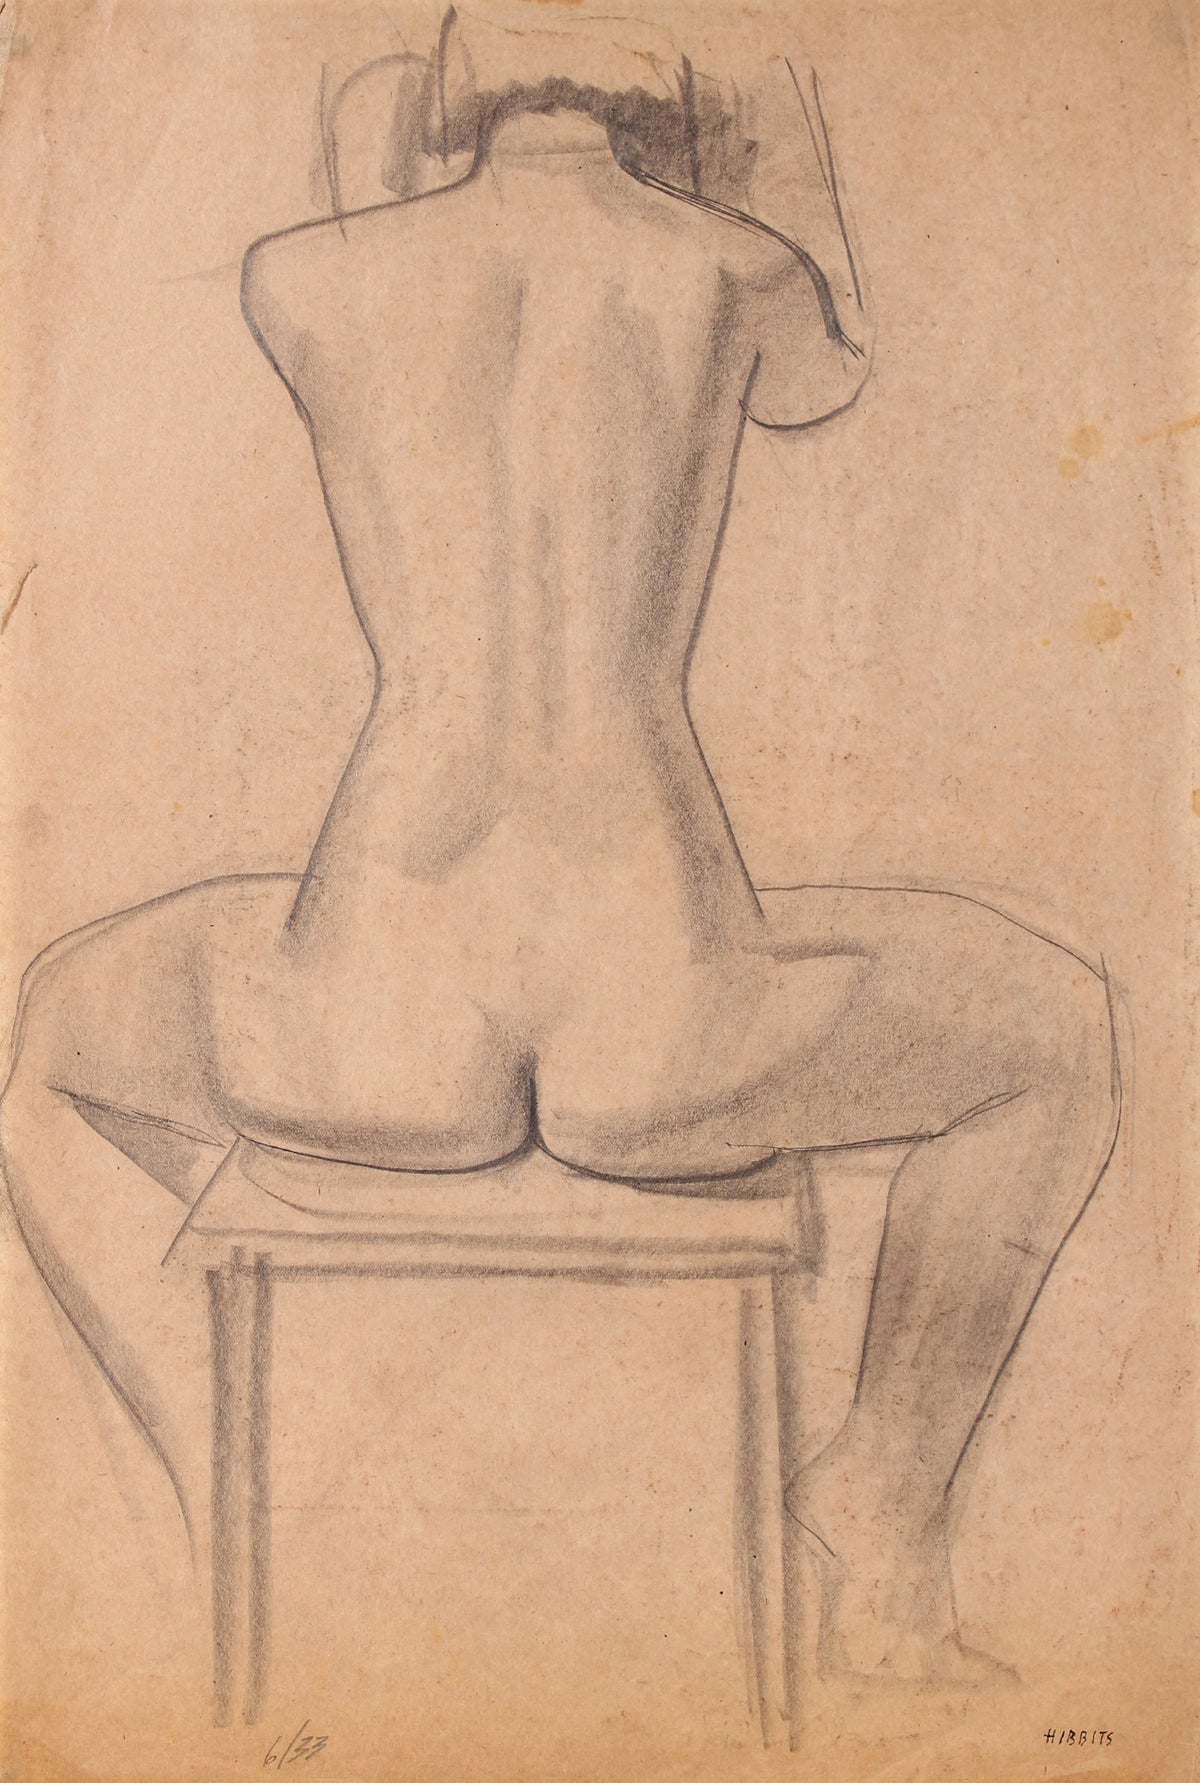 Female Nude in Chair&lt;br&gt;1933 Graphite&lt;br&gt;&lt;br&gt;#90751